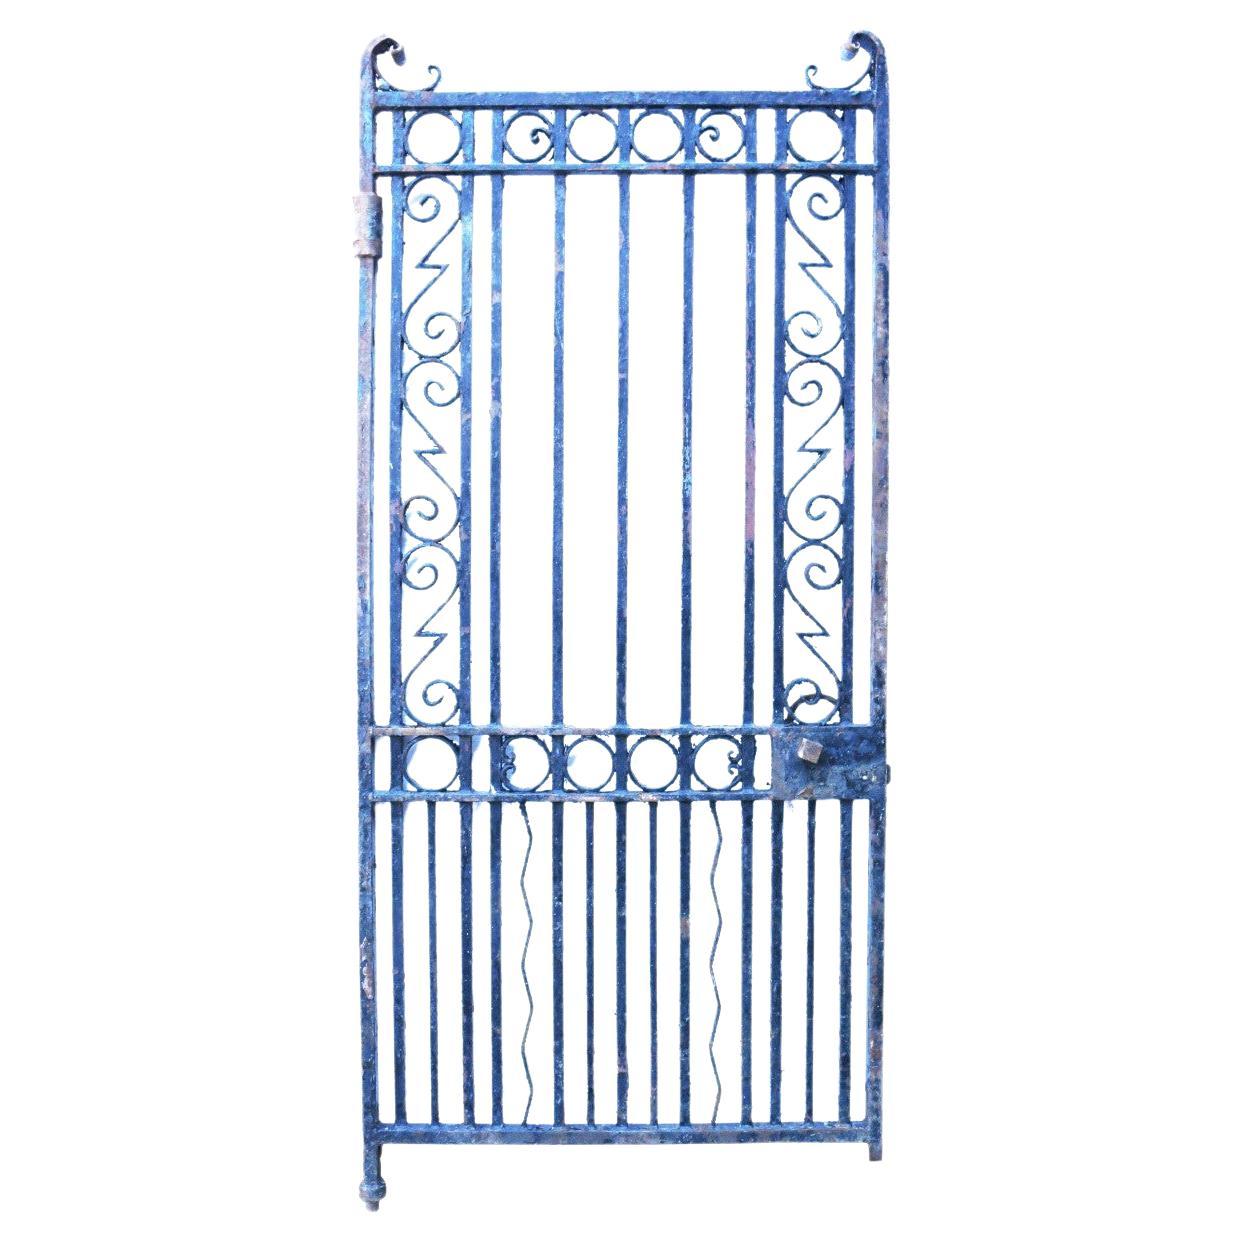 Reclaimed Wrought Iron Pedestrian Gate For Sale